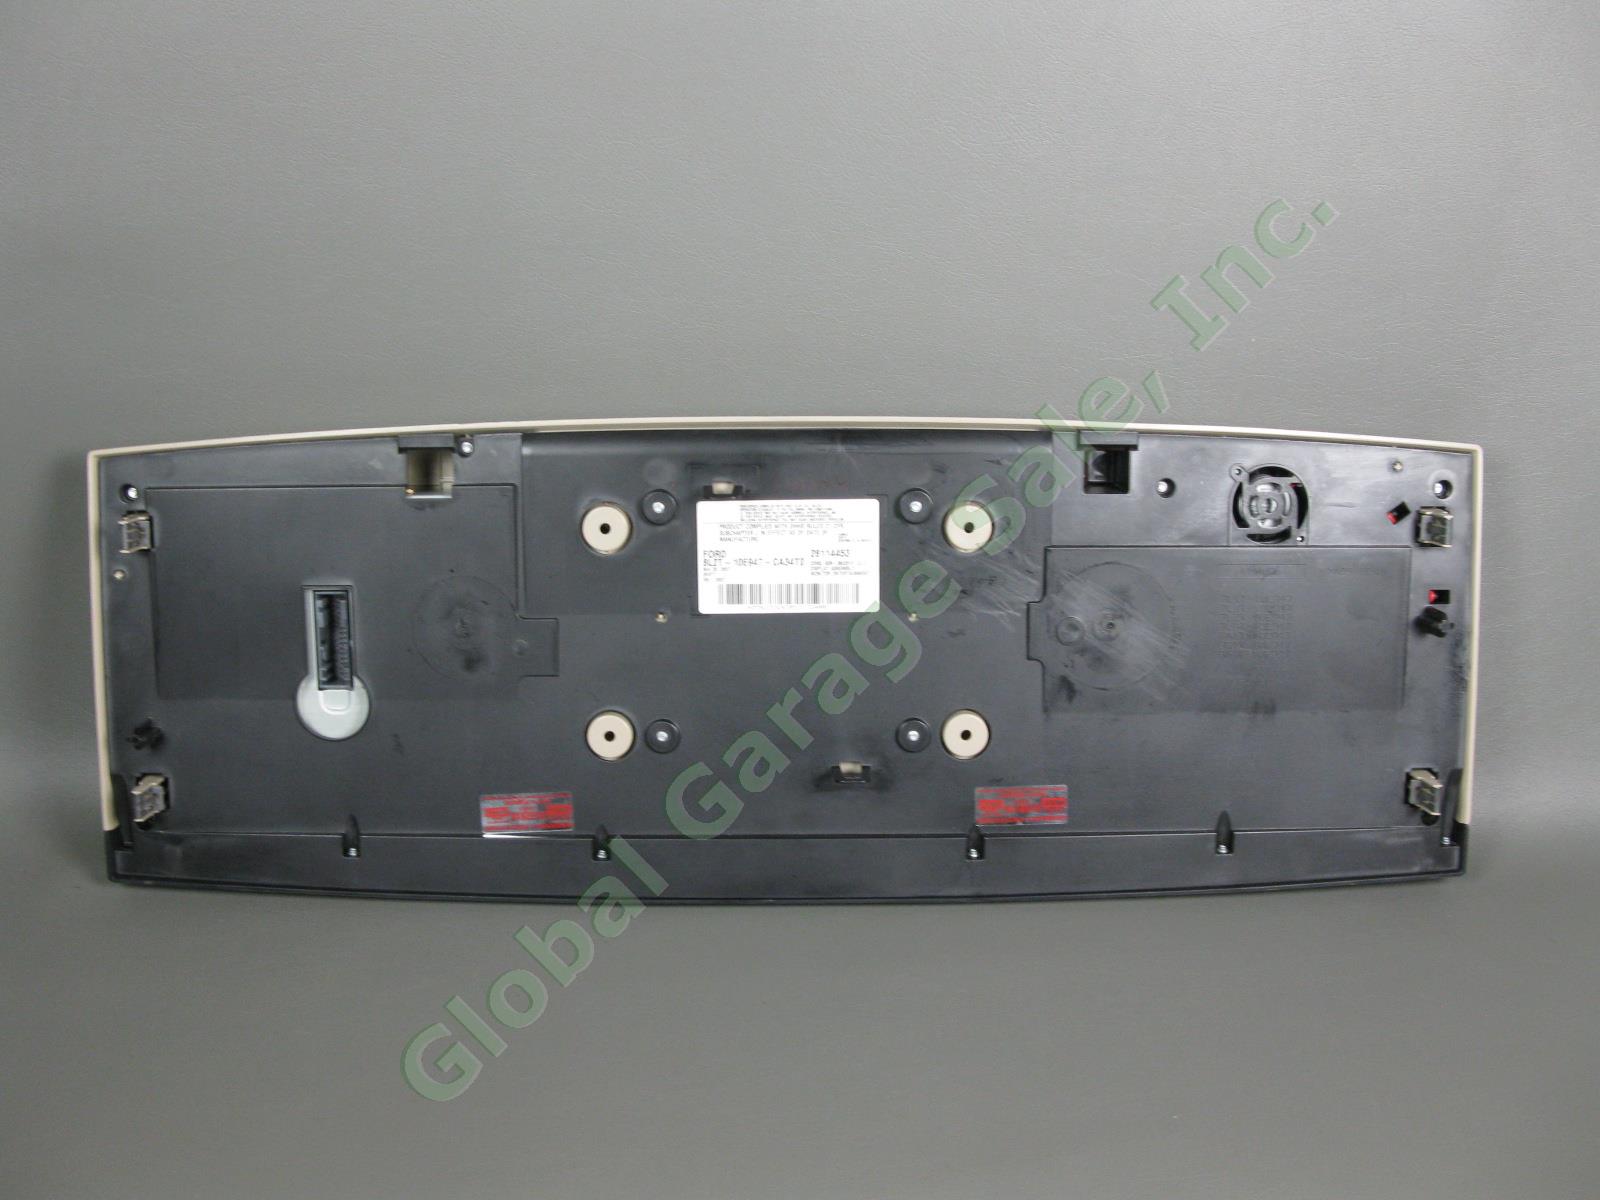 2008 Ford Expedition Overhead Rear Seat DVD Player Display 8L2T-10E947-CA34T0 NR 3